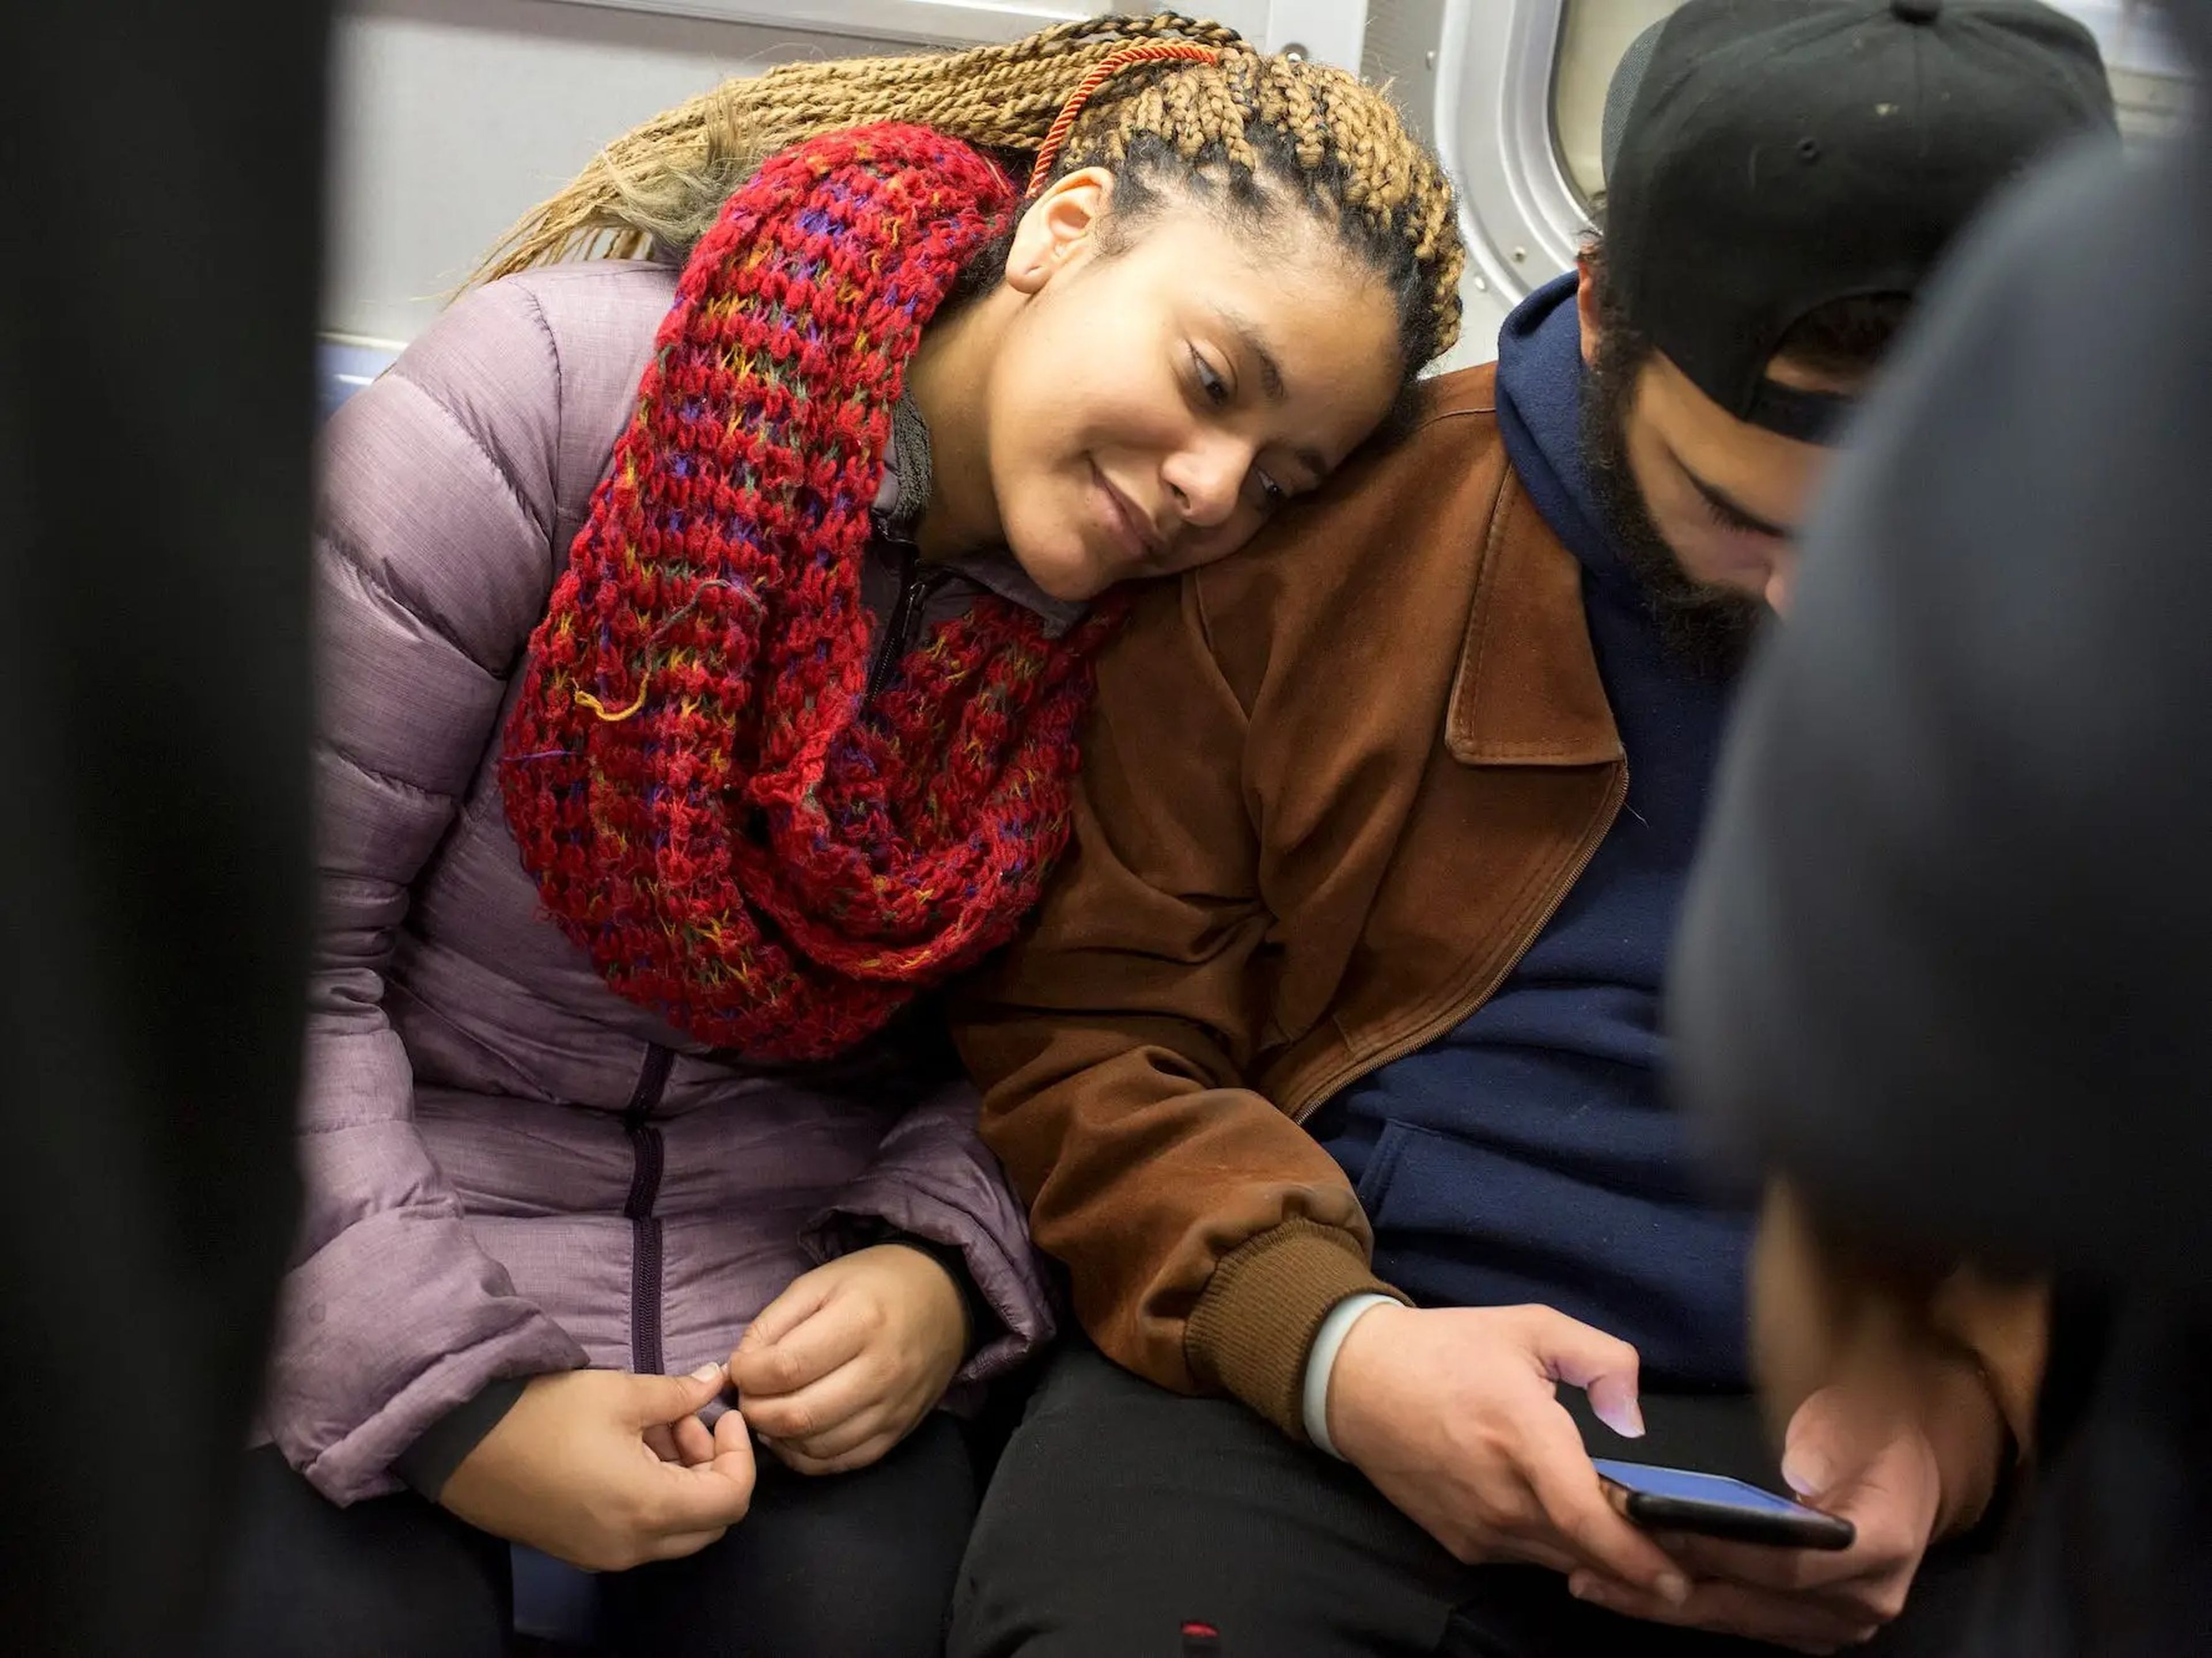 A woman smiles as she leans on her partner's shoulder, looking at a phone he is holding.